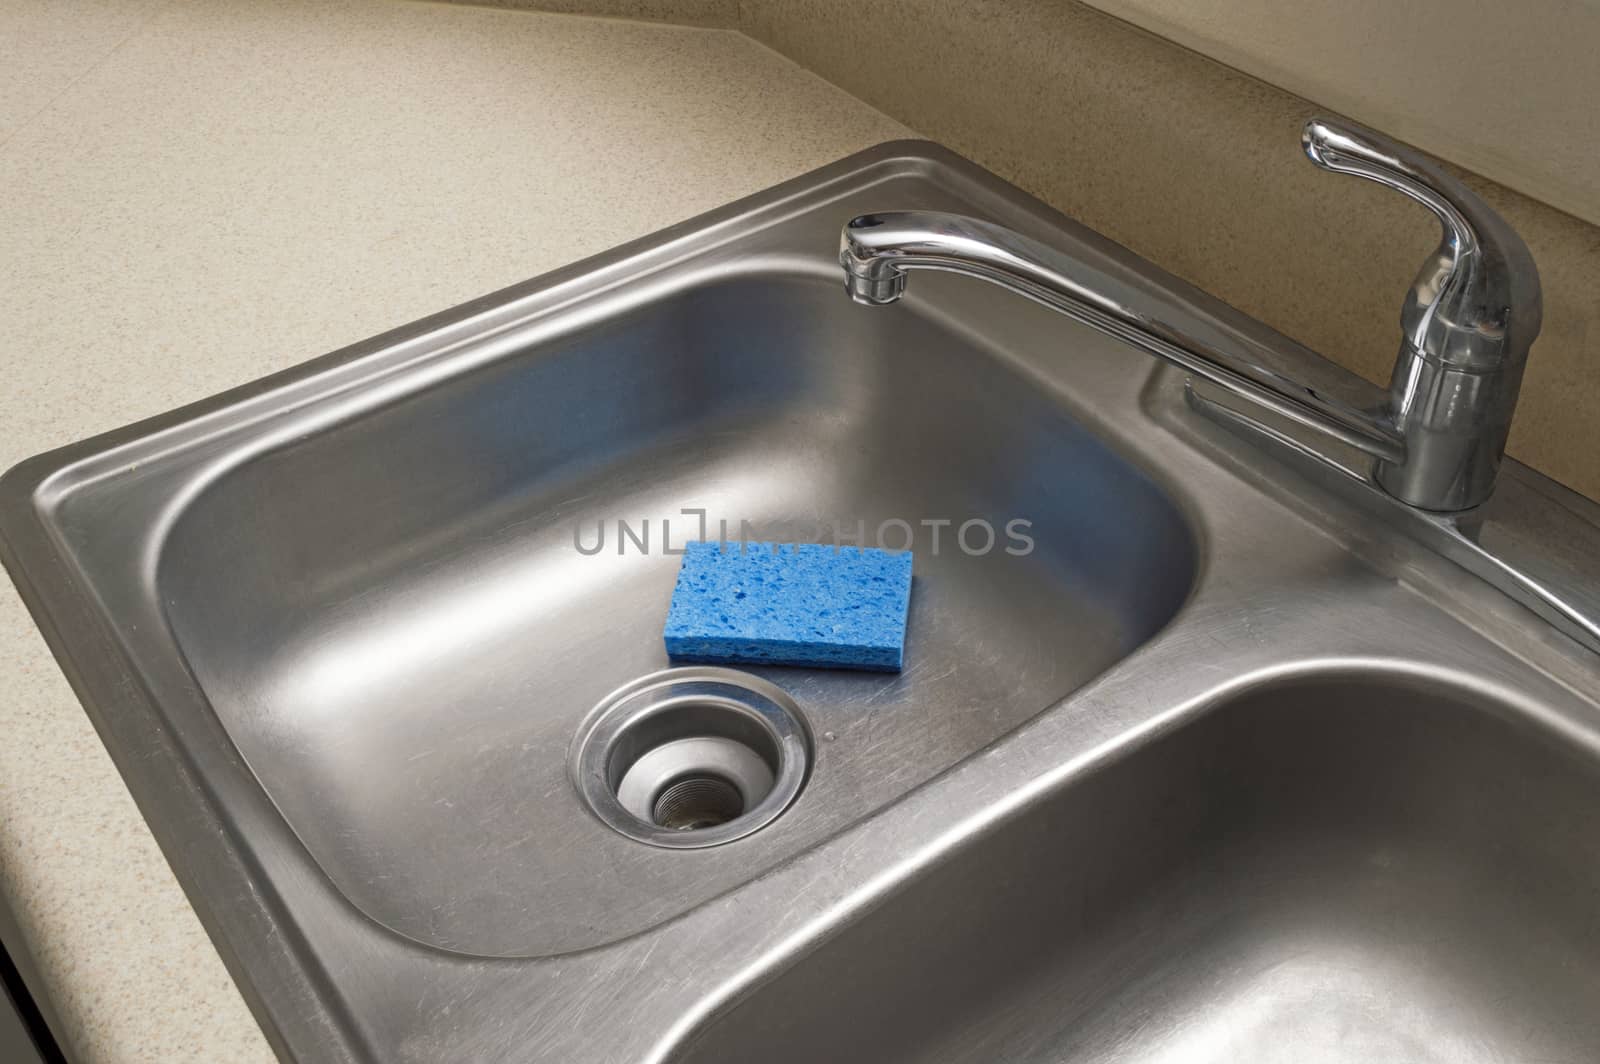 Stainless Steel Sink With Sponge by stockbuster1